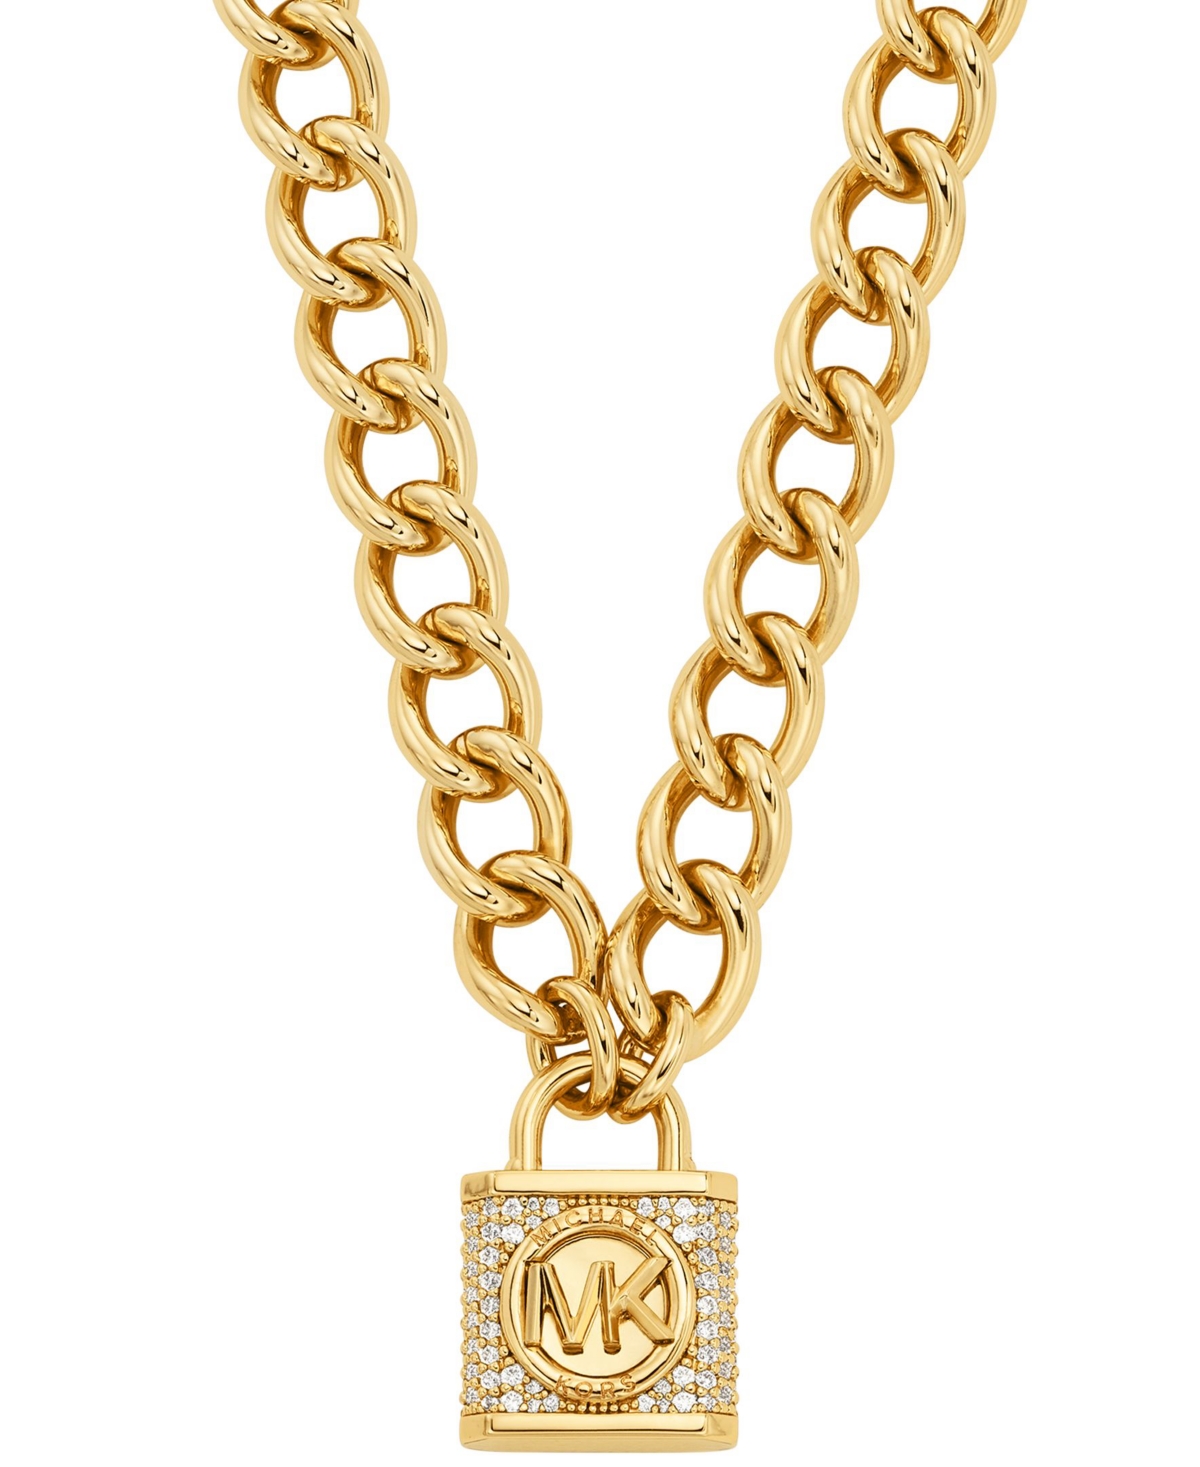 Michael Kors Pave Lock Chain Necklace In Gold